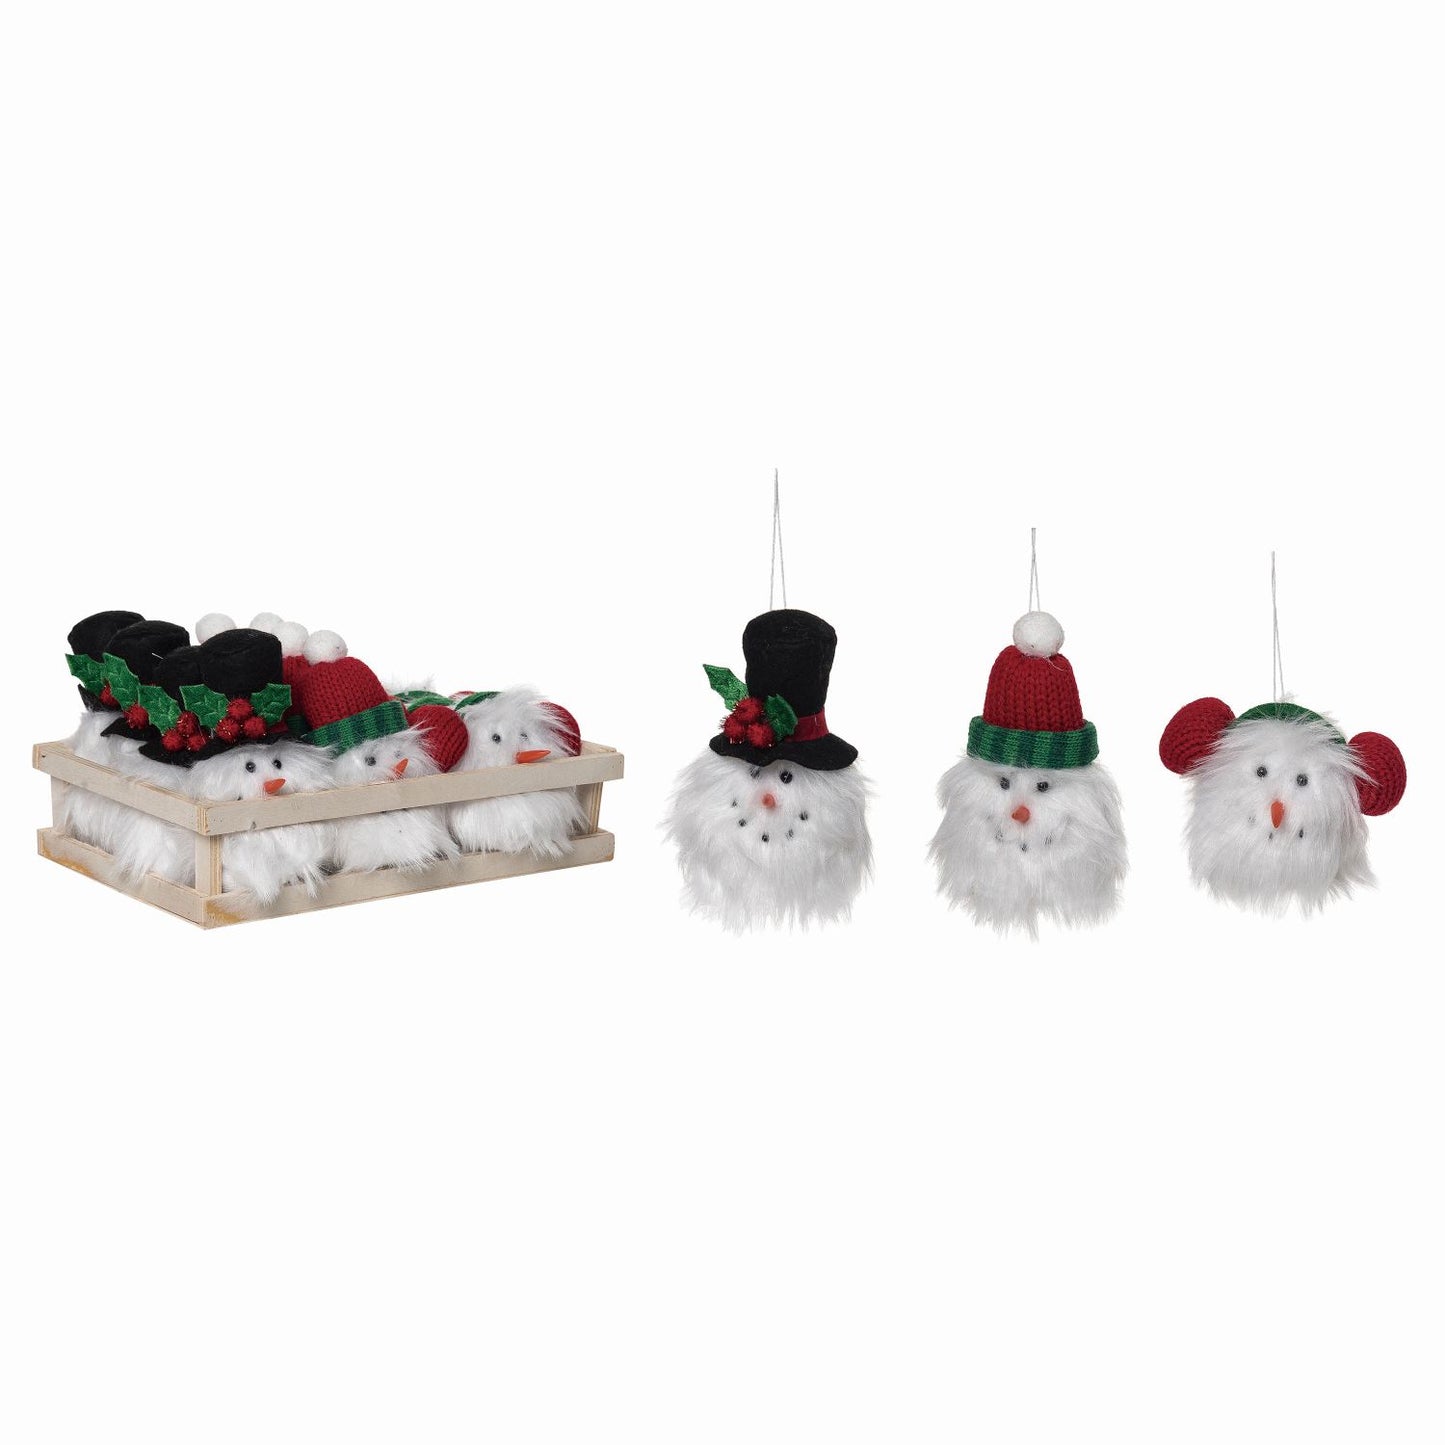 Transpac Plush Snowman Ornaments In Crate, Set Of 12